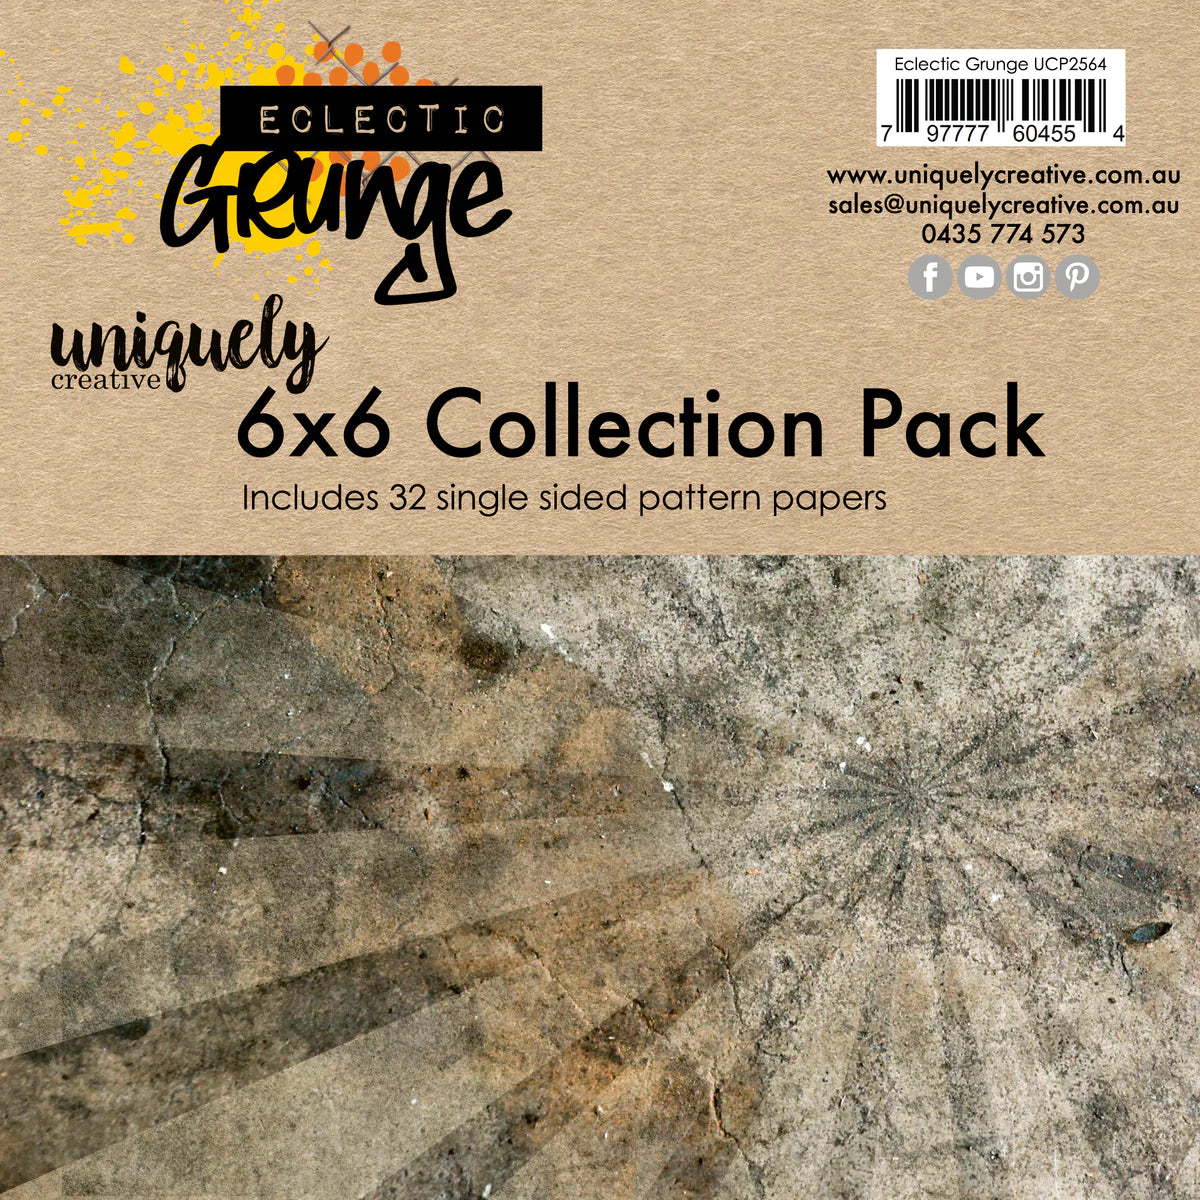 Uniquely Creative - 6x6 Collection Pack - Eclectic Grunge